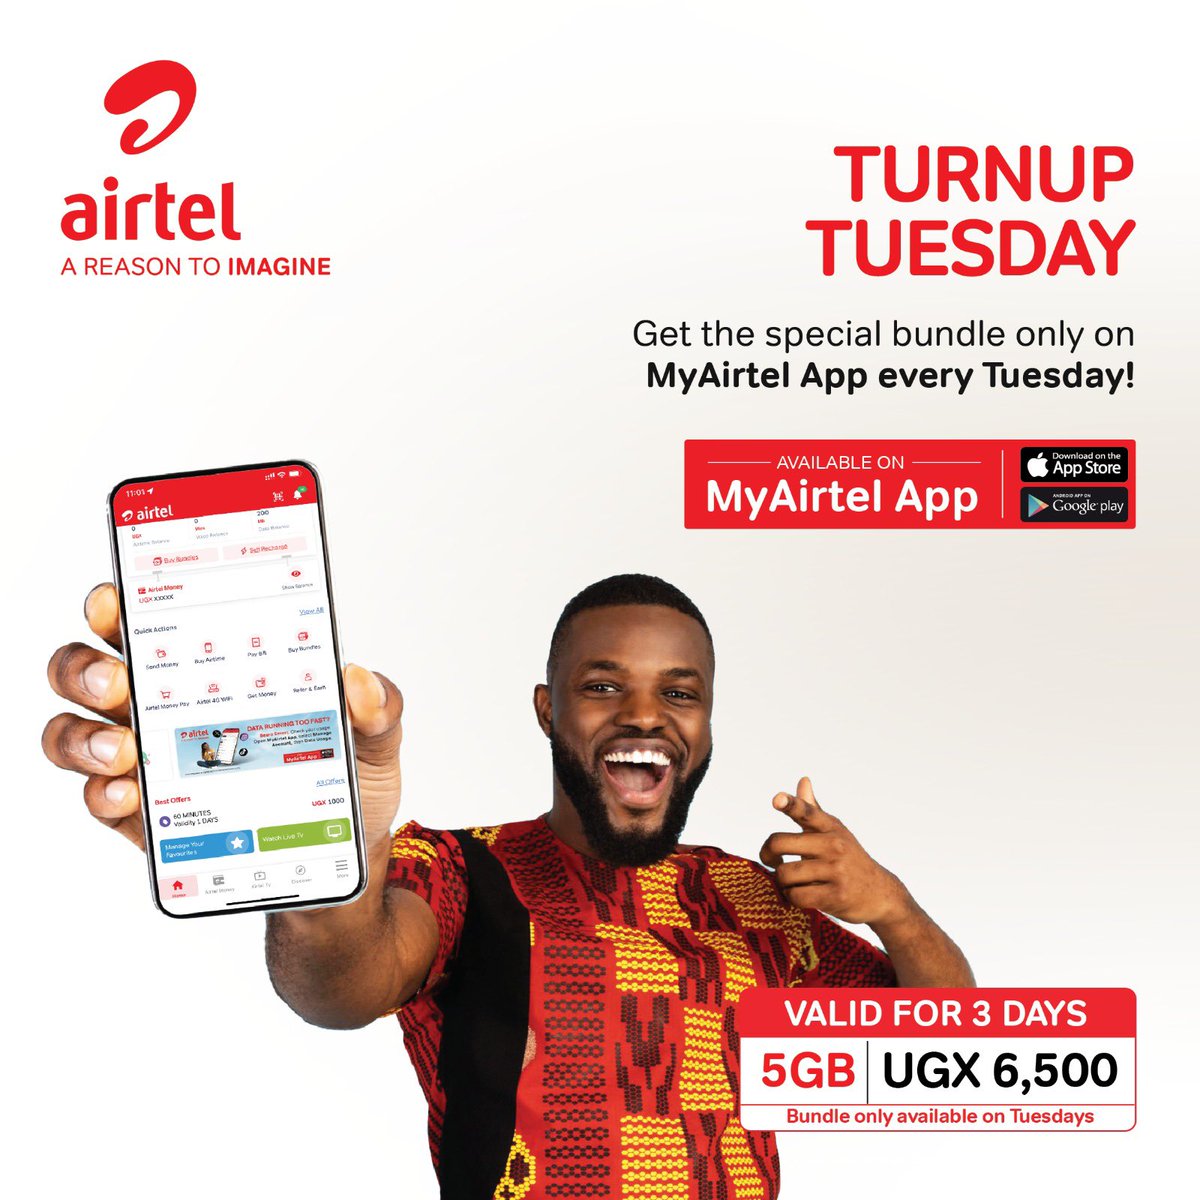 Hey you , Get the special #TurnUpTuesday bundle offer only my  #MyAirtelApp   now valid for 3 days 5G at just Ugx 6,500.